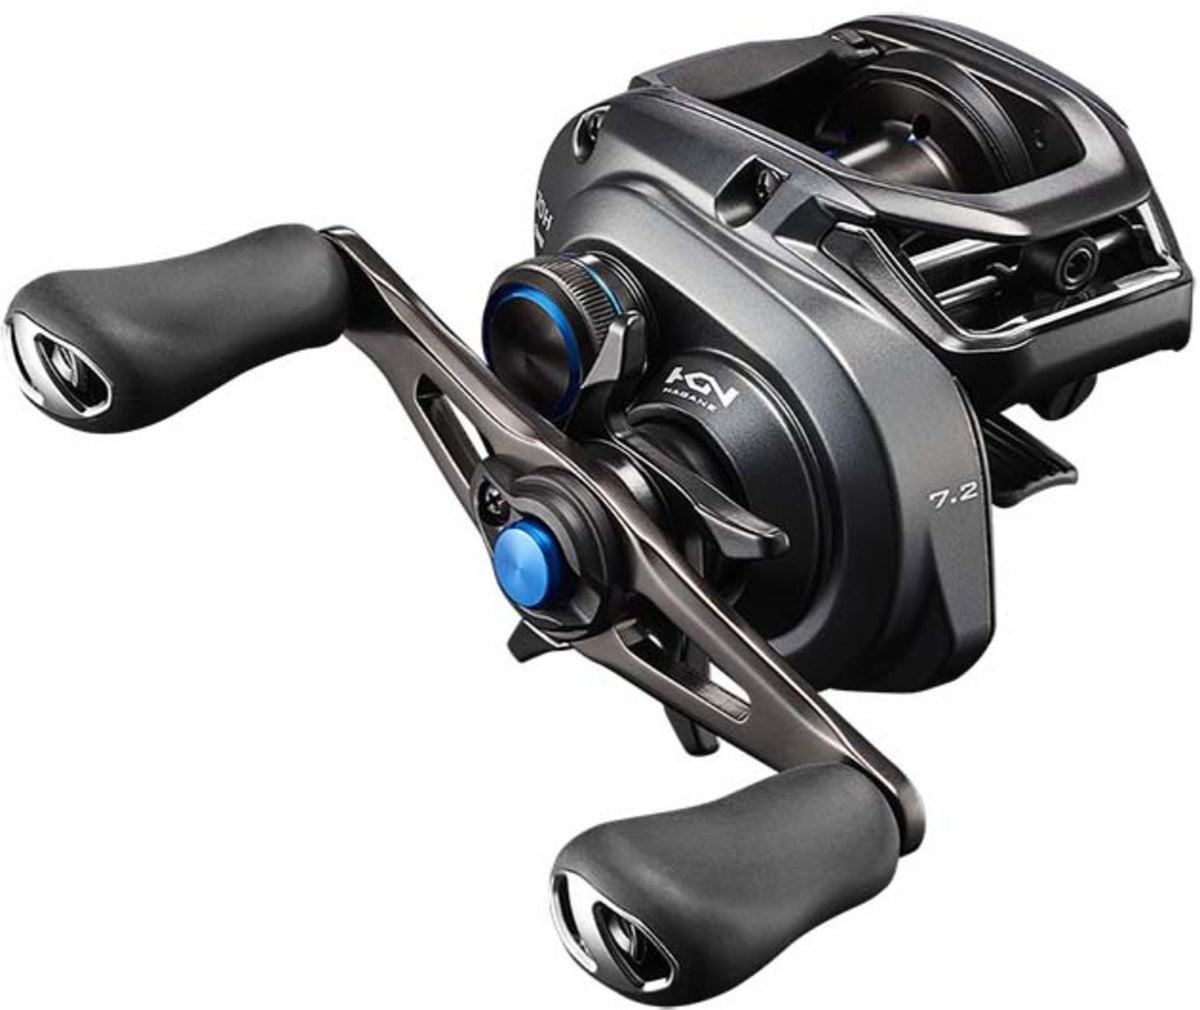 Shimano SLX DC 151 (3 stores) find the best price now »